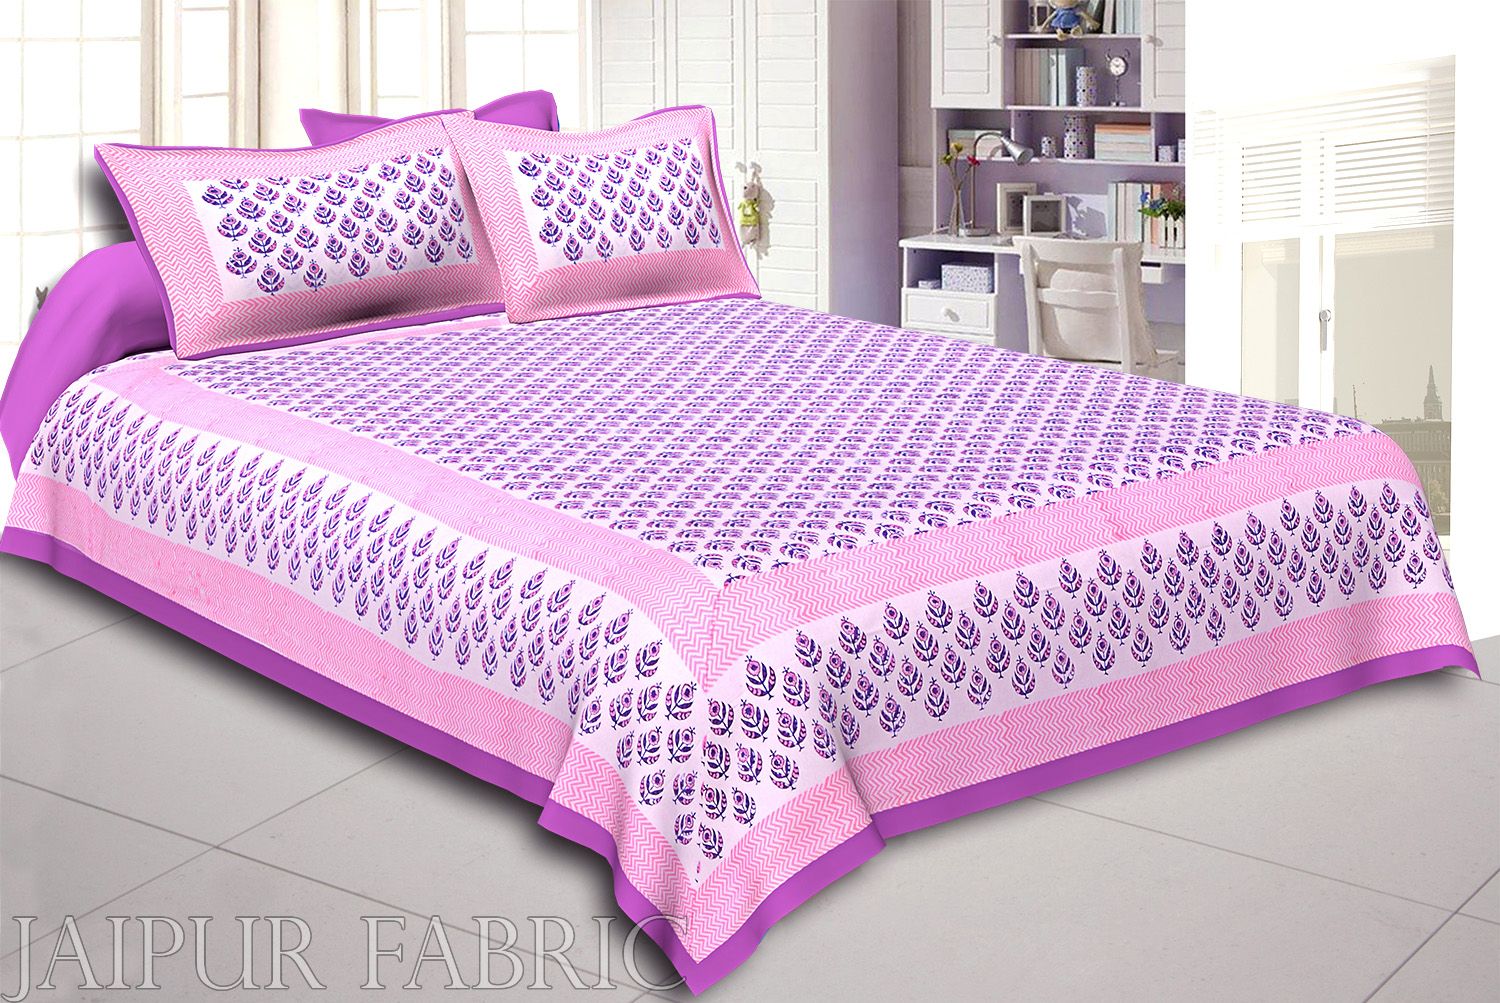 Purple Color Handmade Block Print on white base Double Bed Sheet with Two Pillow Covers